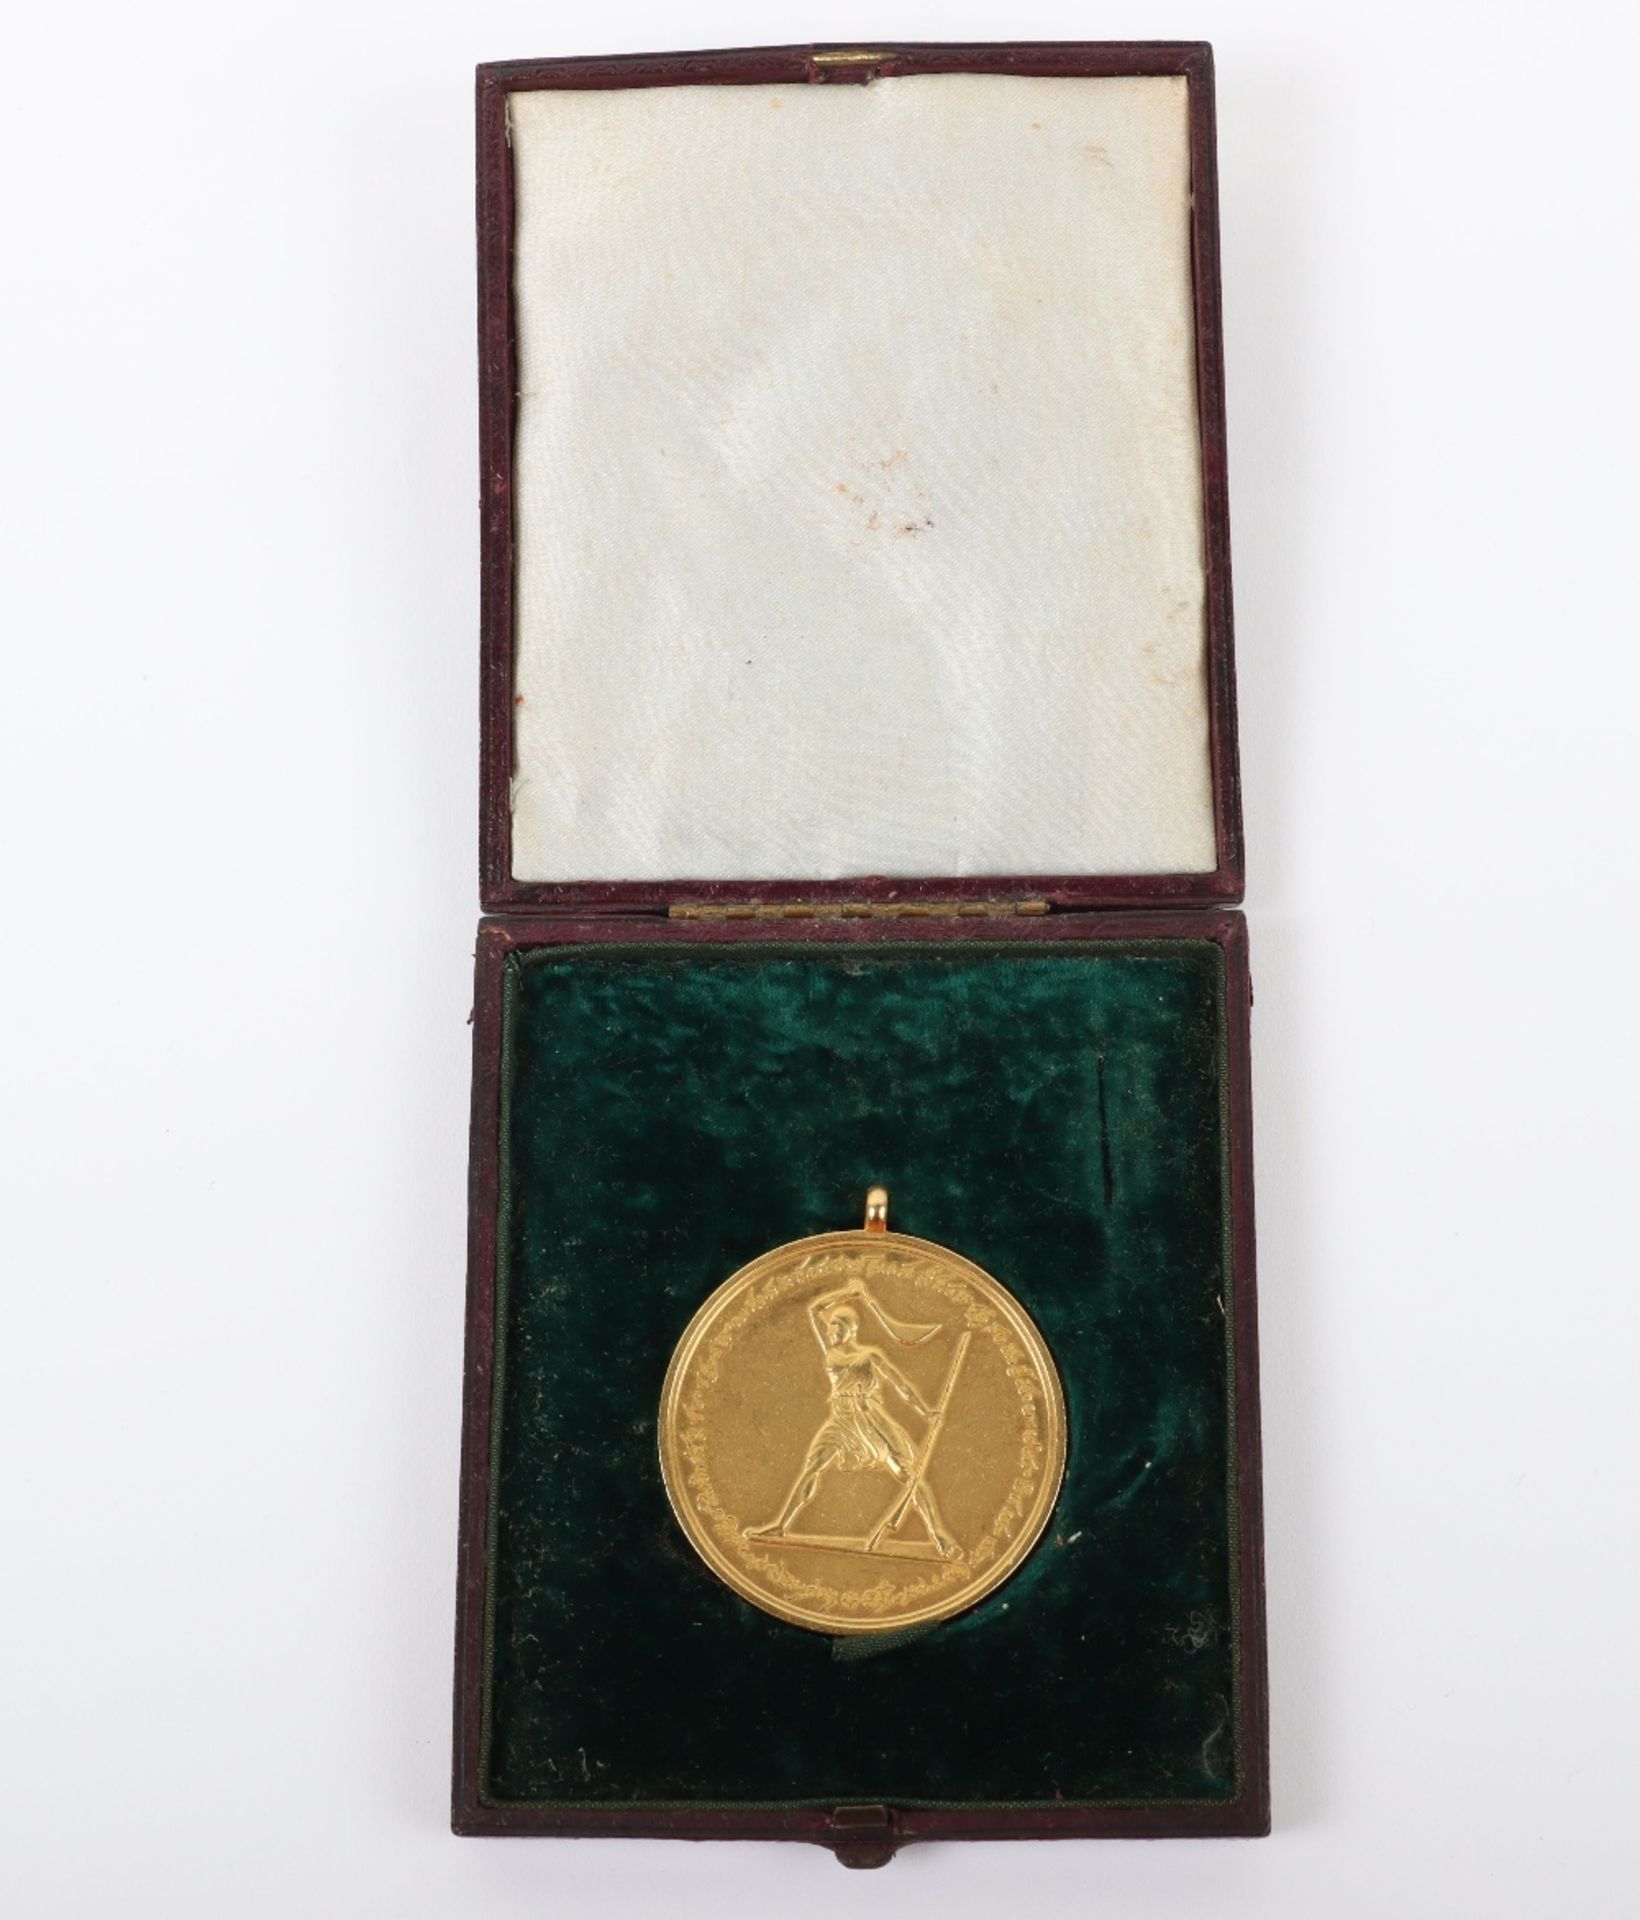 Rare Honourable East India Company Medal for the Coorg Rebellion 1837, 3rd Class Gold Medal (4 Tolas - Image 4 of 5